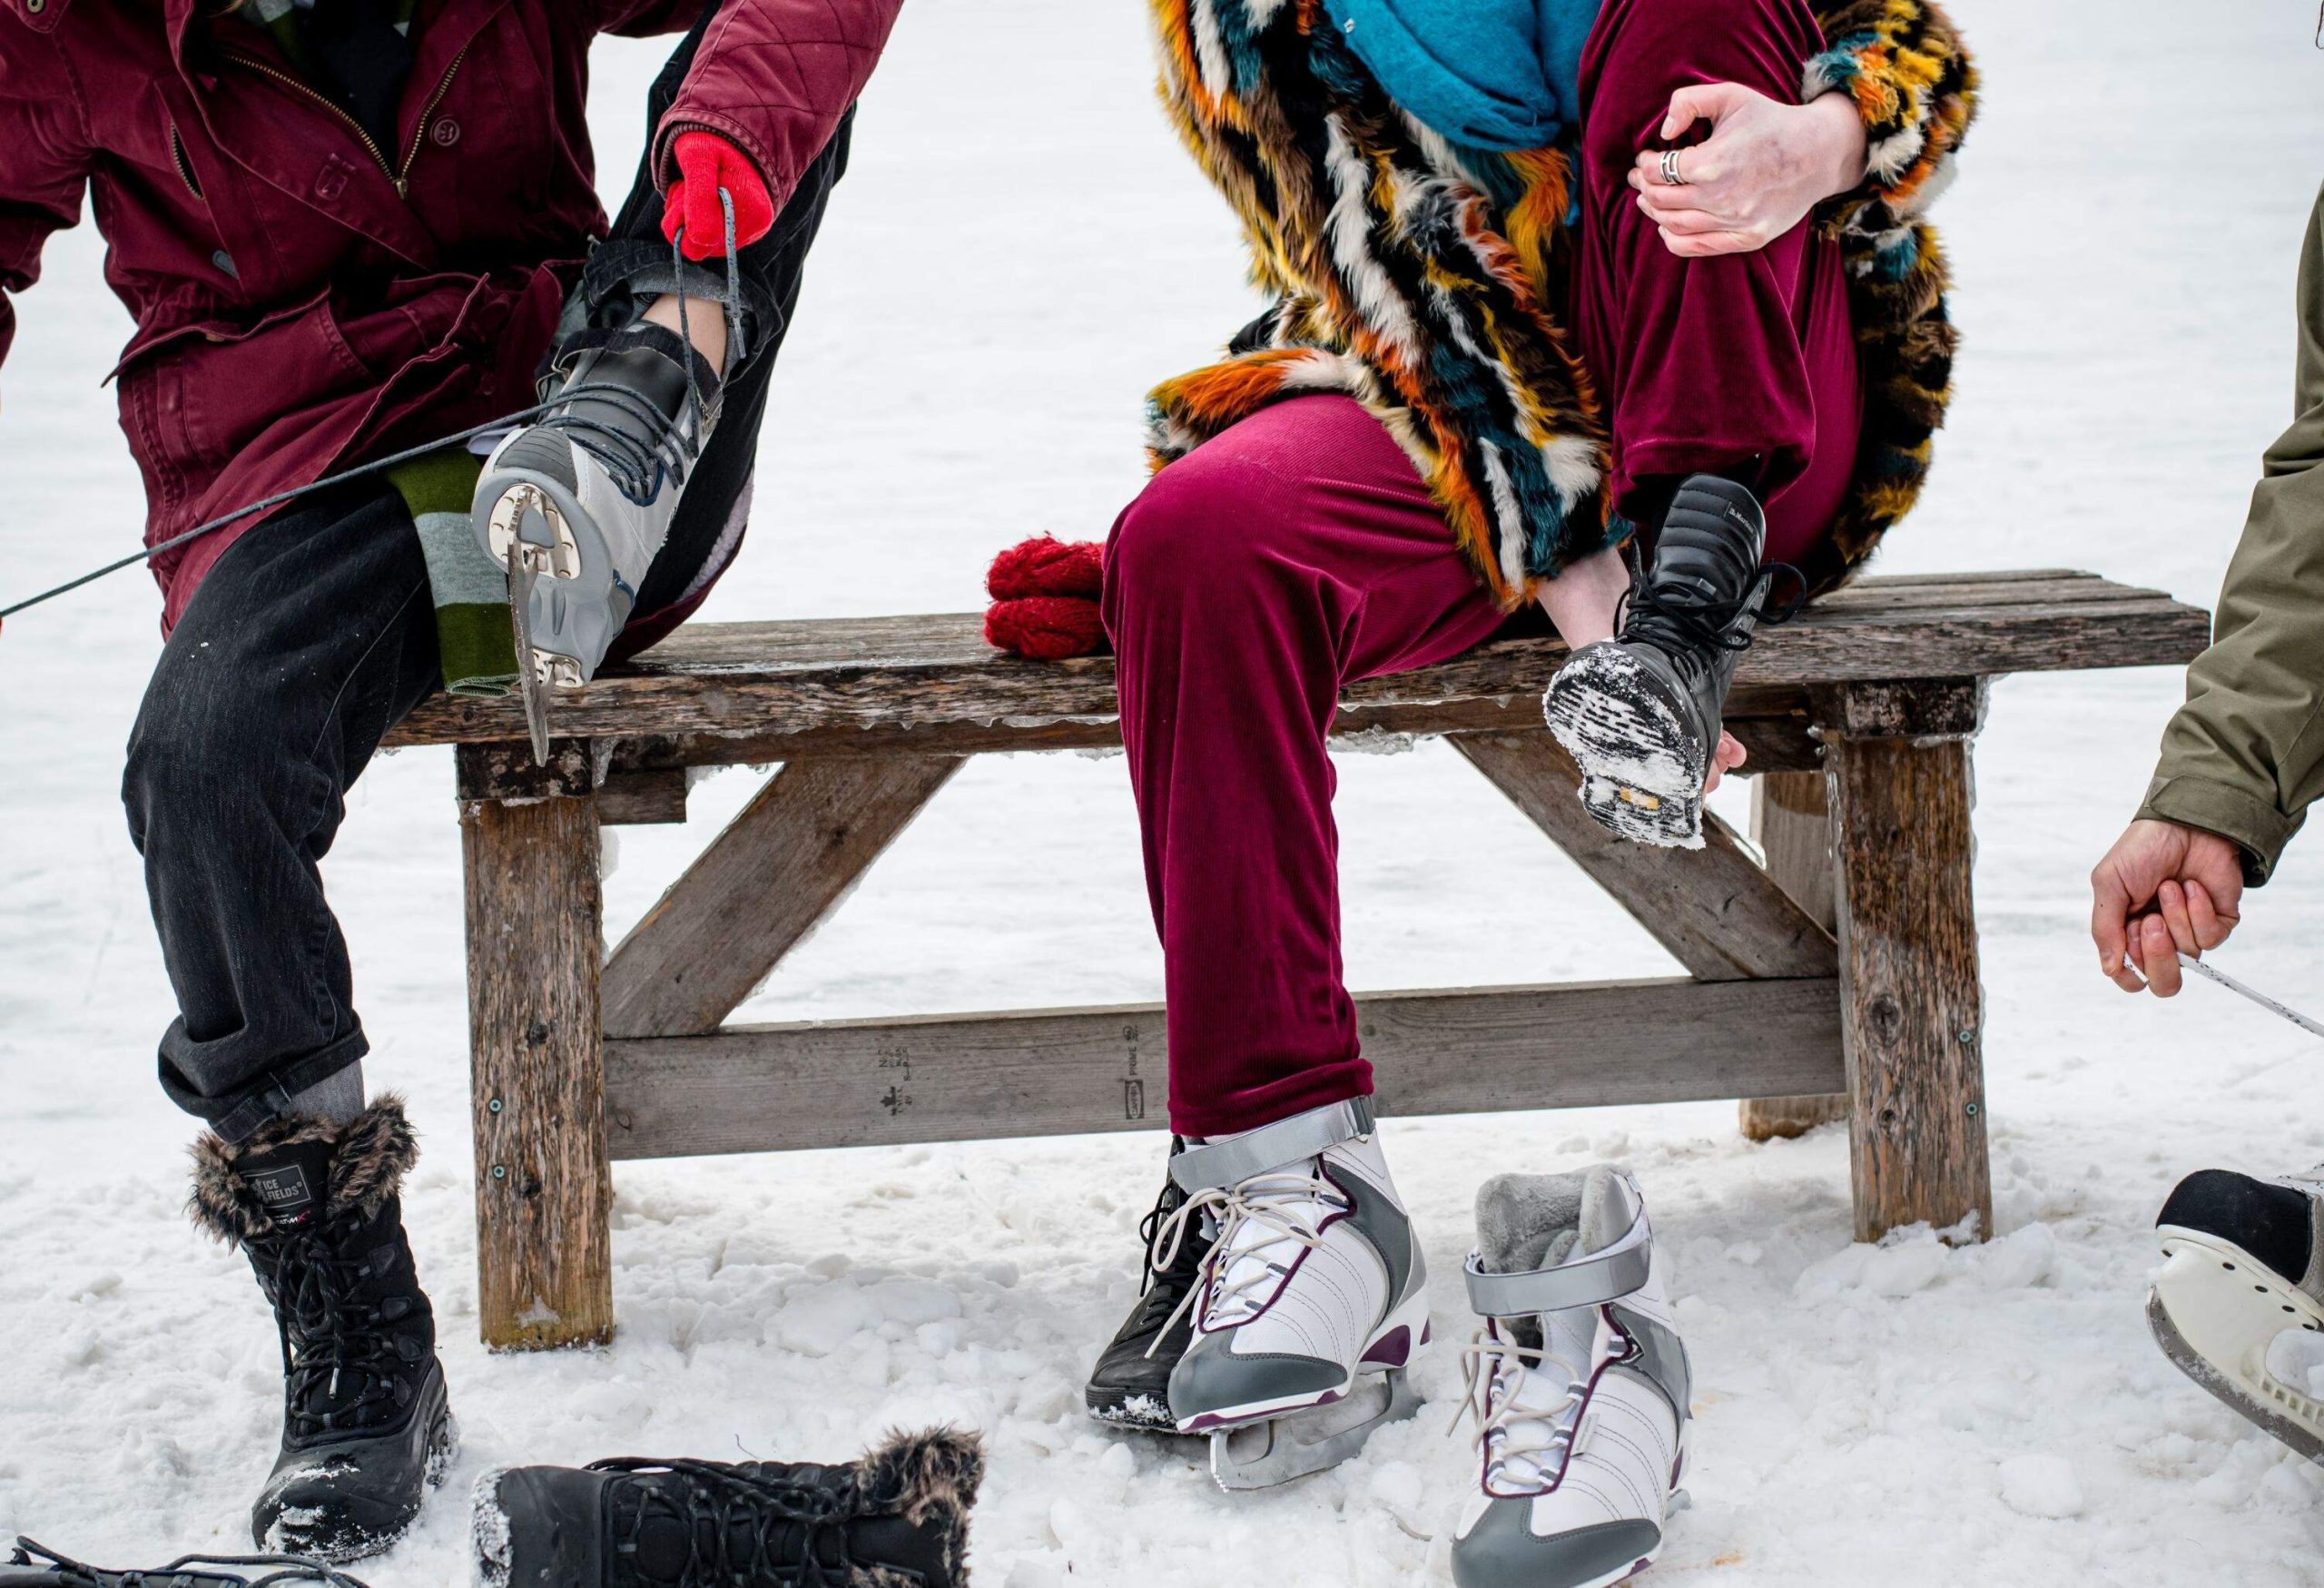 Winter preparations take center stage as the trans teen gets ready for skating by the lake, surrounded by the laughter and support of their chosen family, creating a scene of anticipation and camaraderie